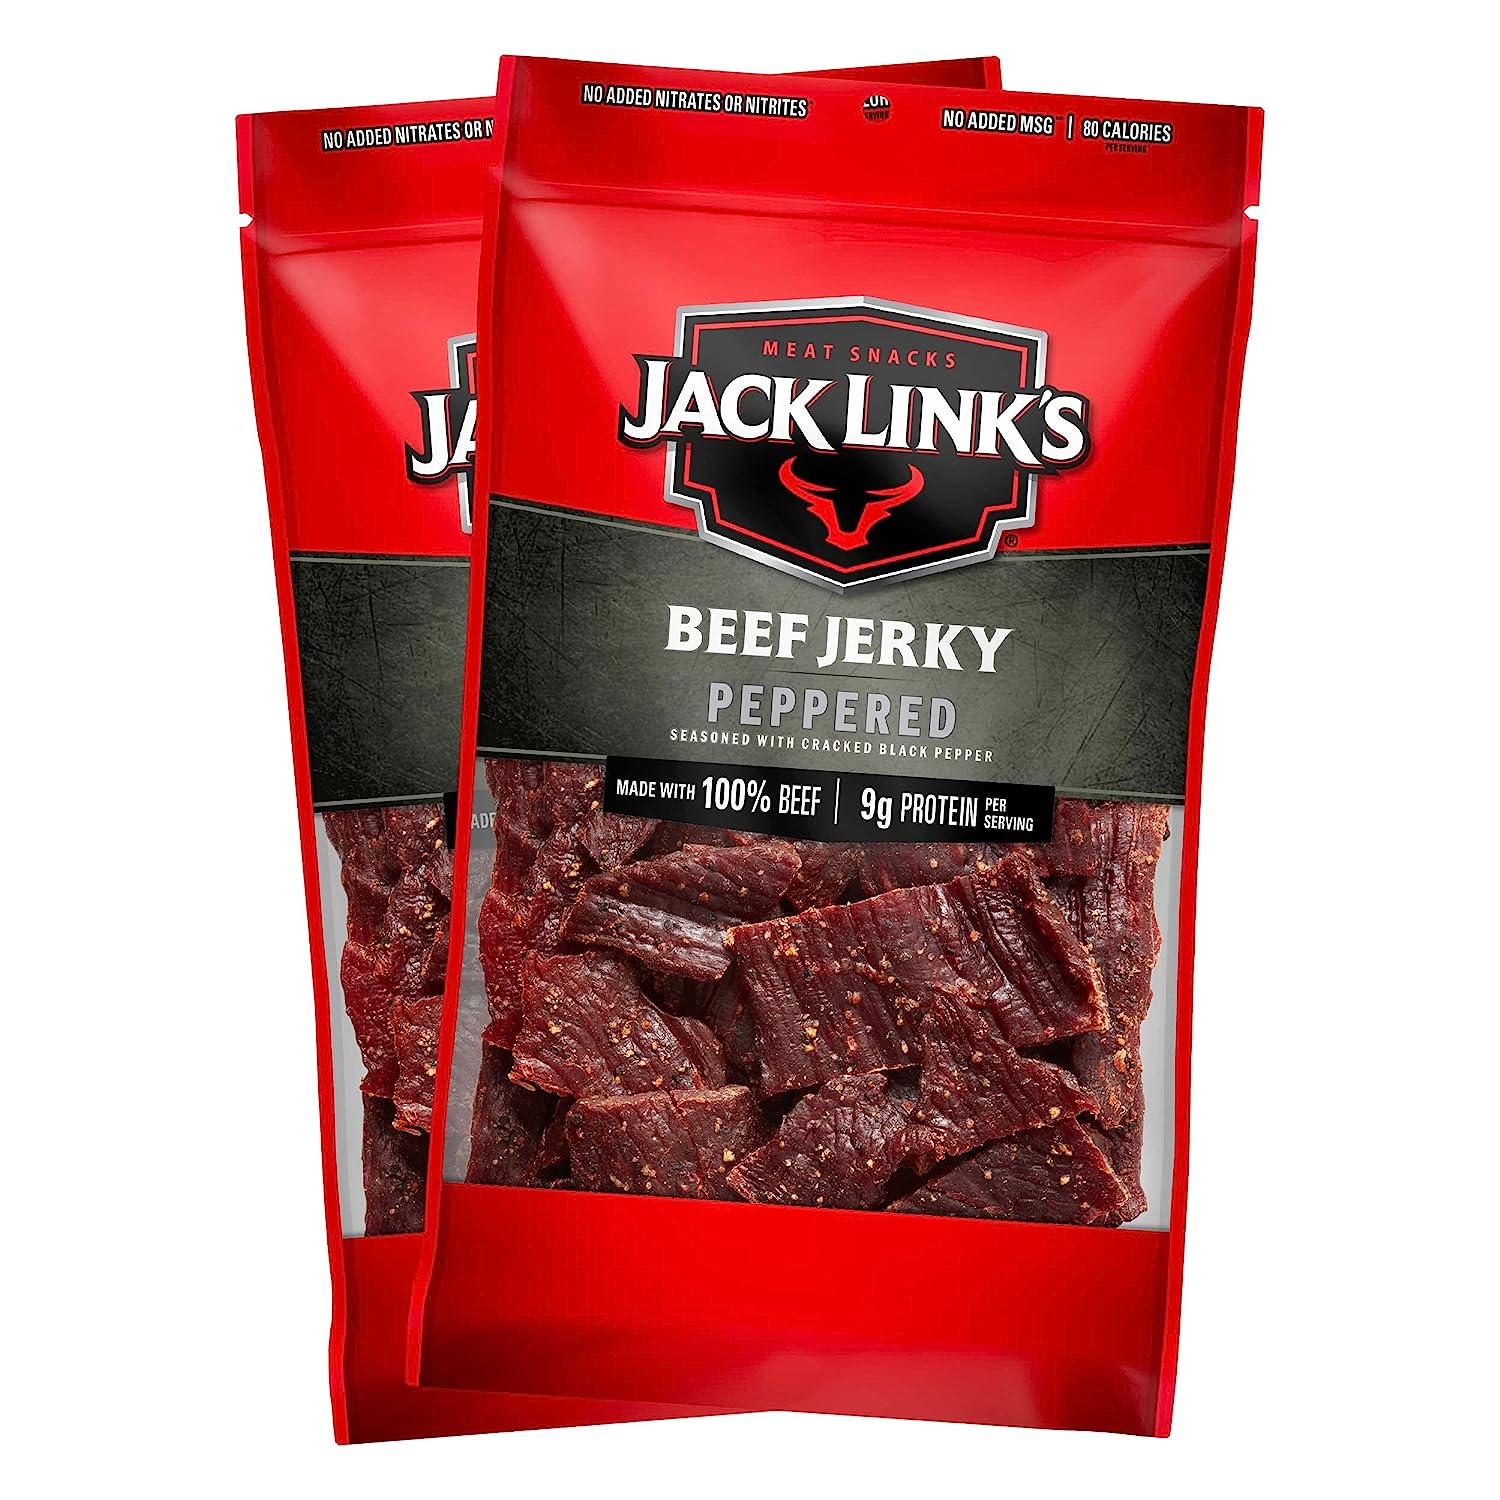 2-Pack 9-Ounce Jack Link's Beef Jerky Peppered at Amazon with S&S $15.09